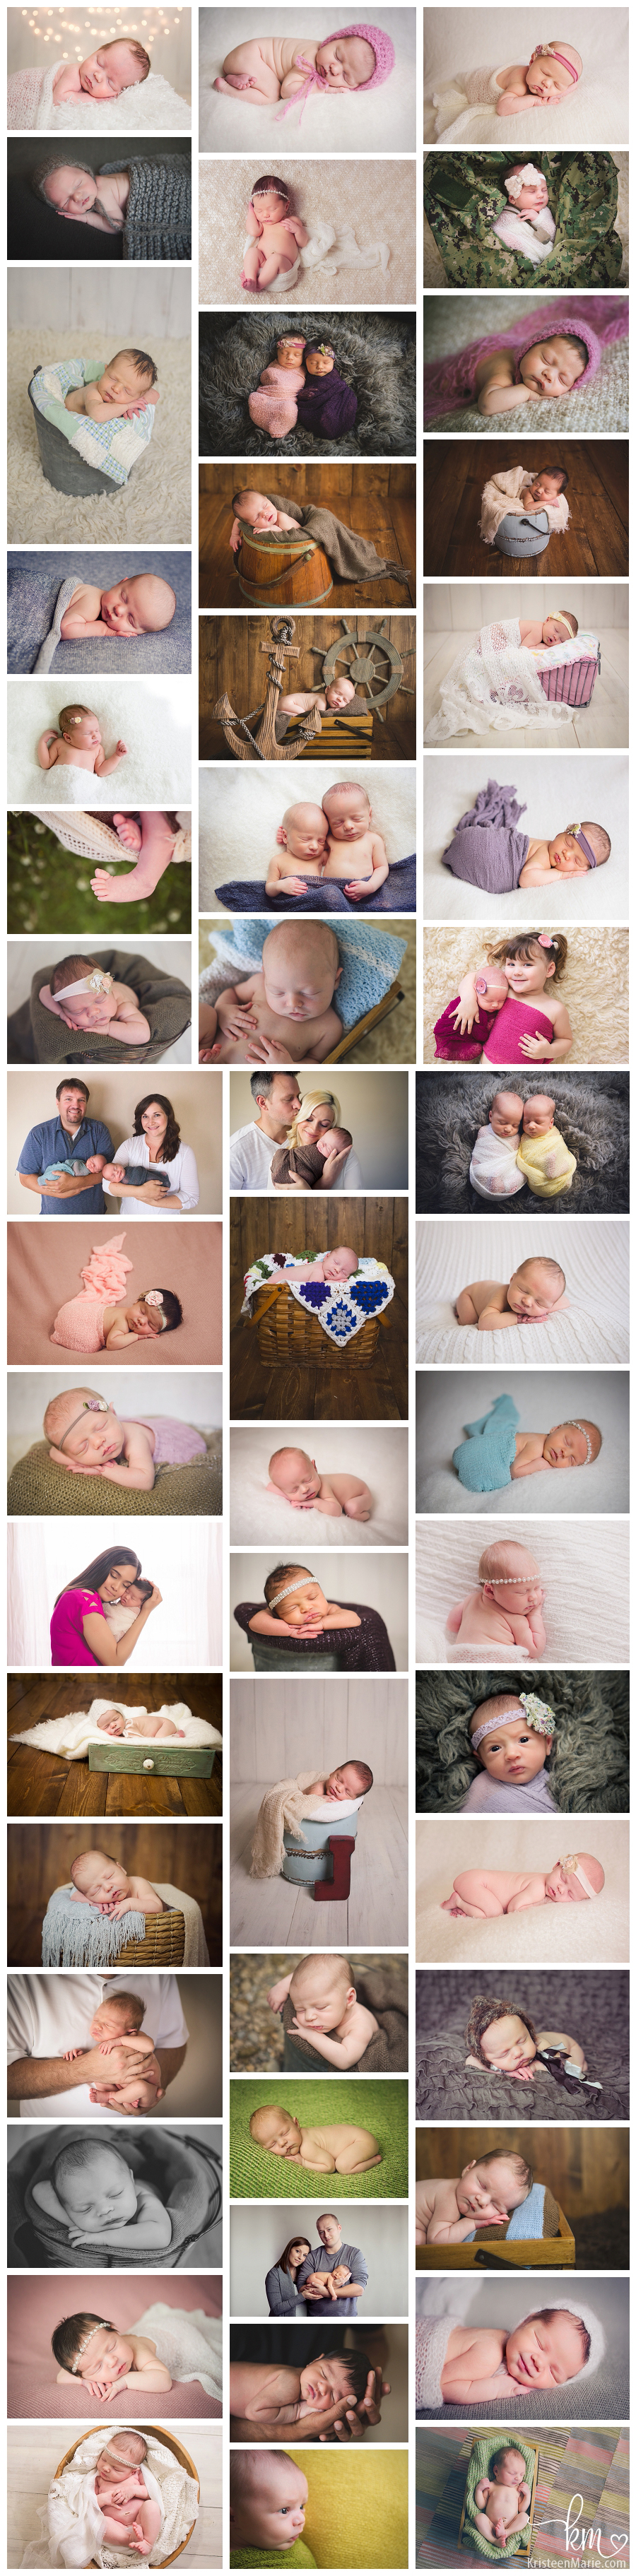 Indianapolis Newborn Photography by KristeenMarie Photography